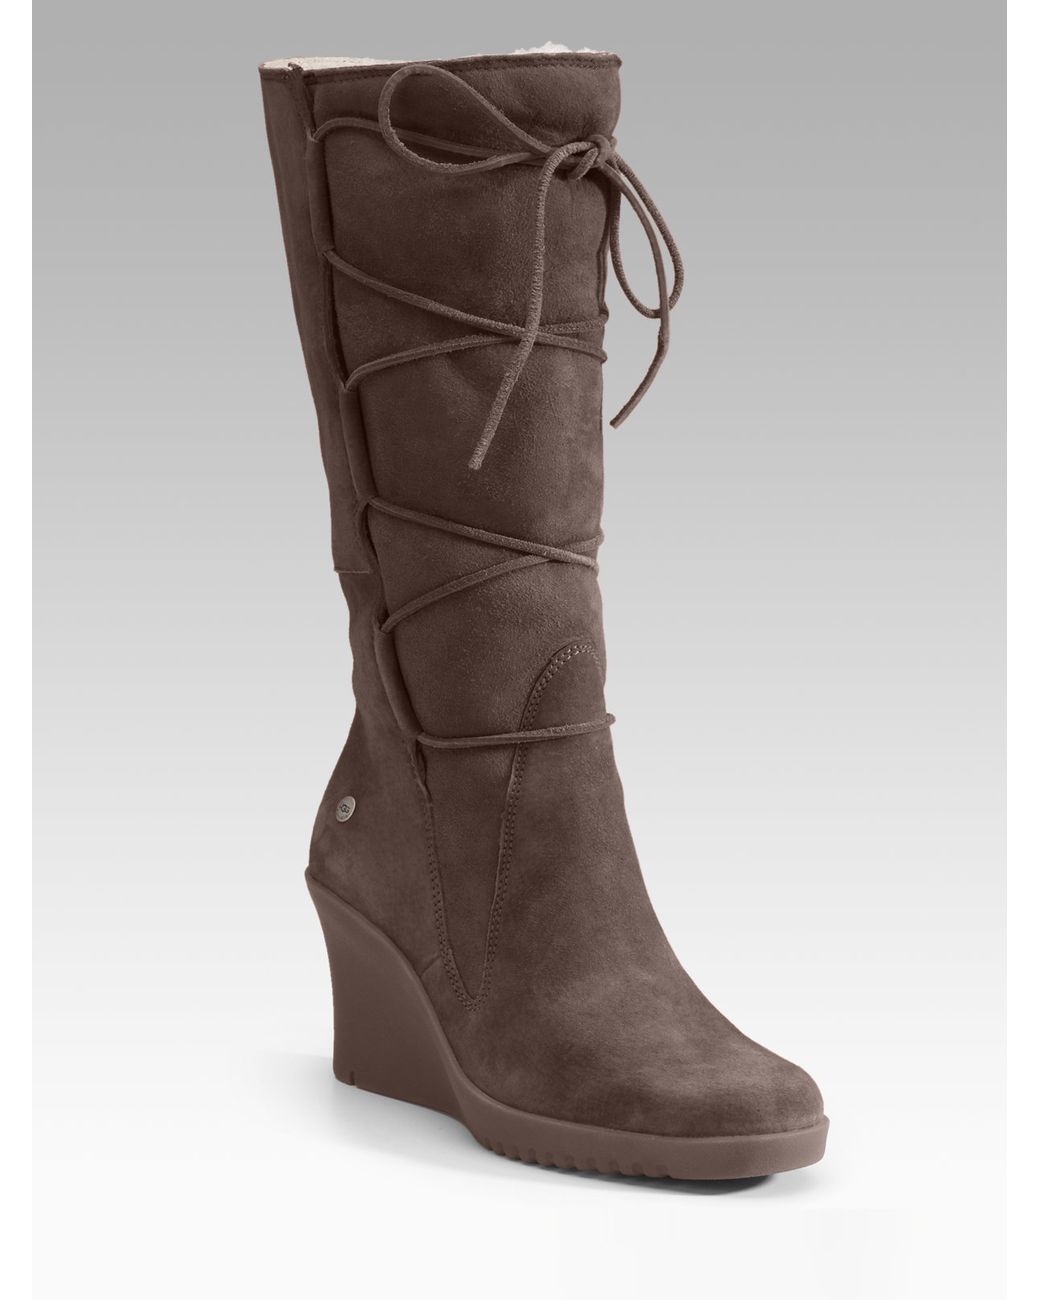 UGG Laceup Wedge Tall Boots in Brown | Lyst